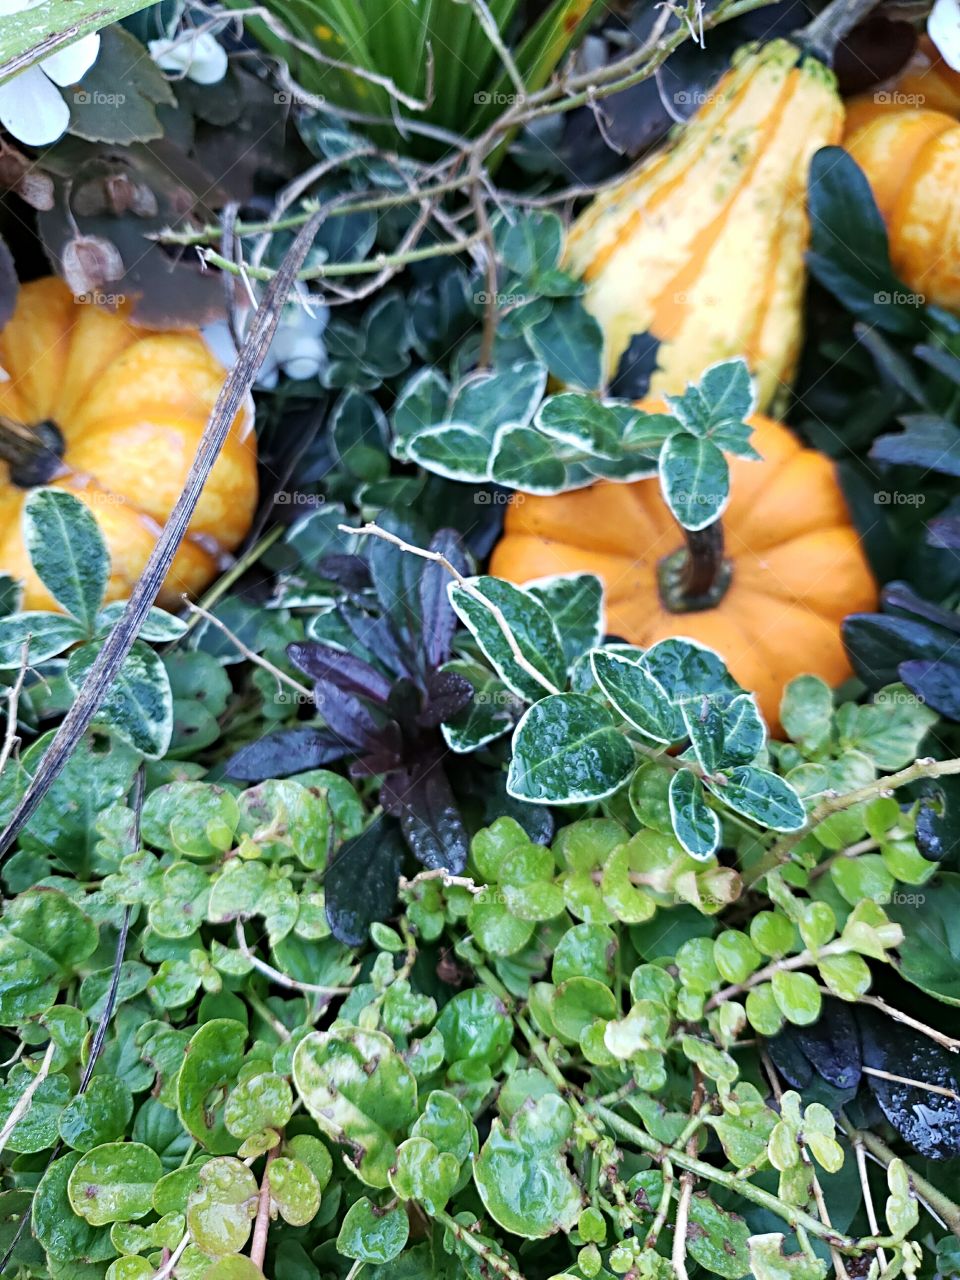 mini pumpkins and gourds in outdoor plant